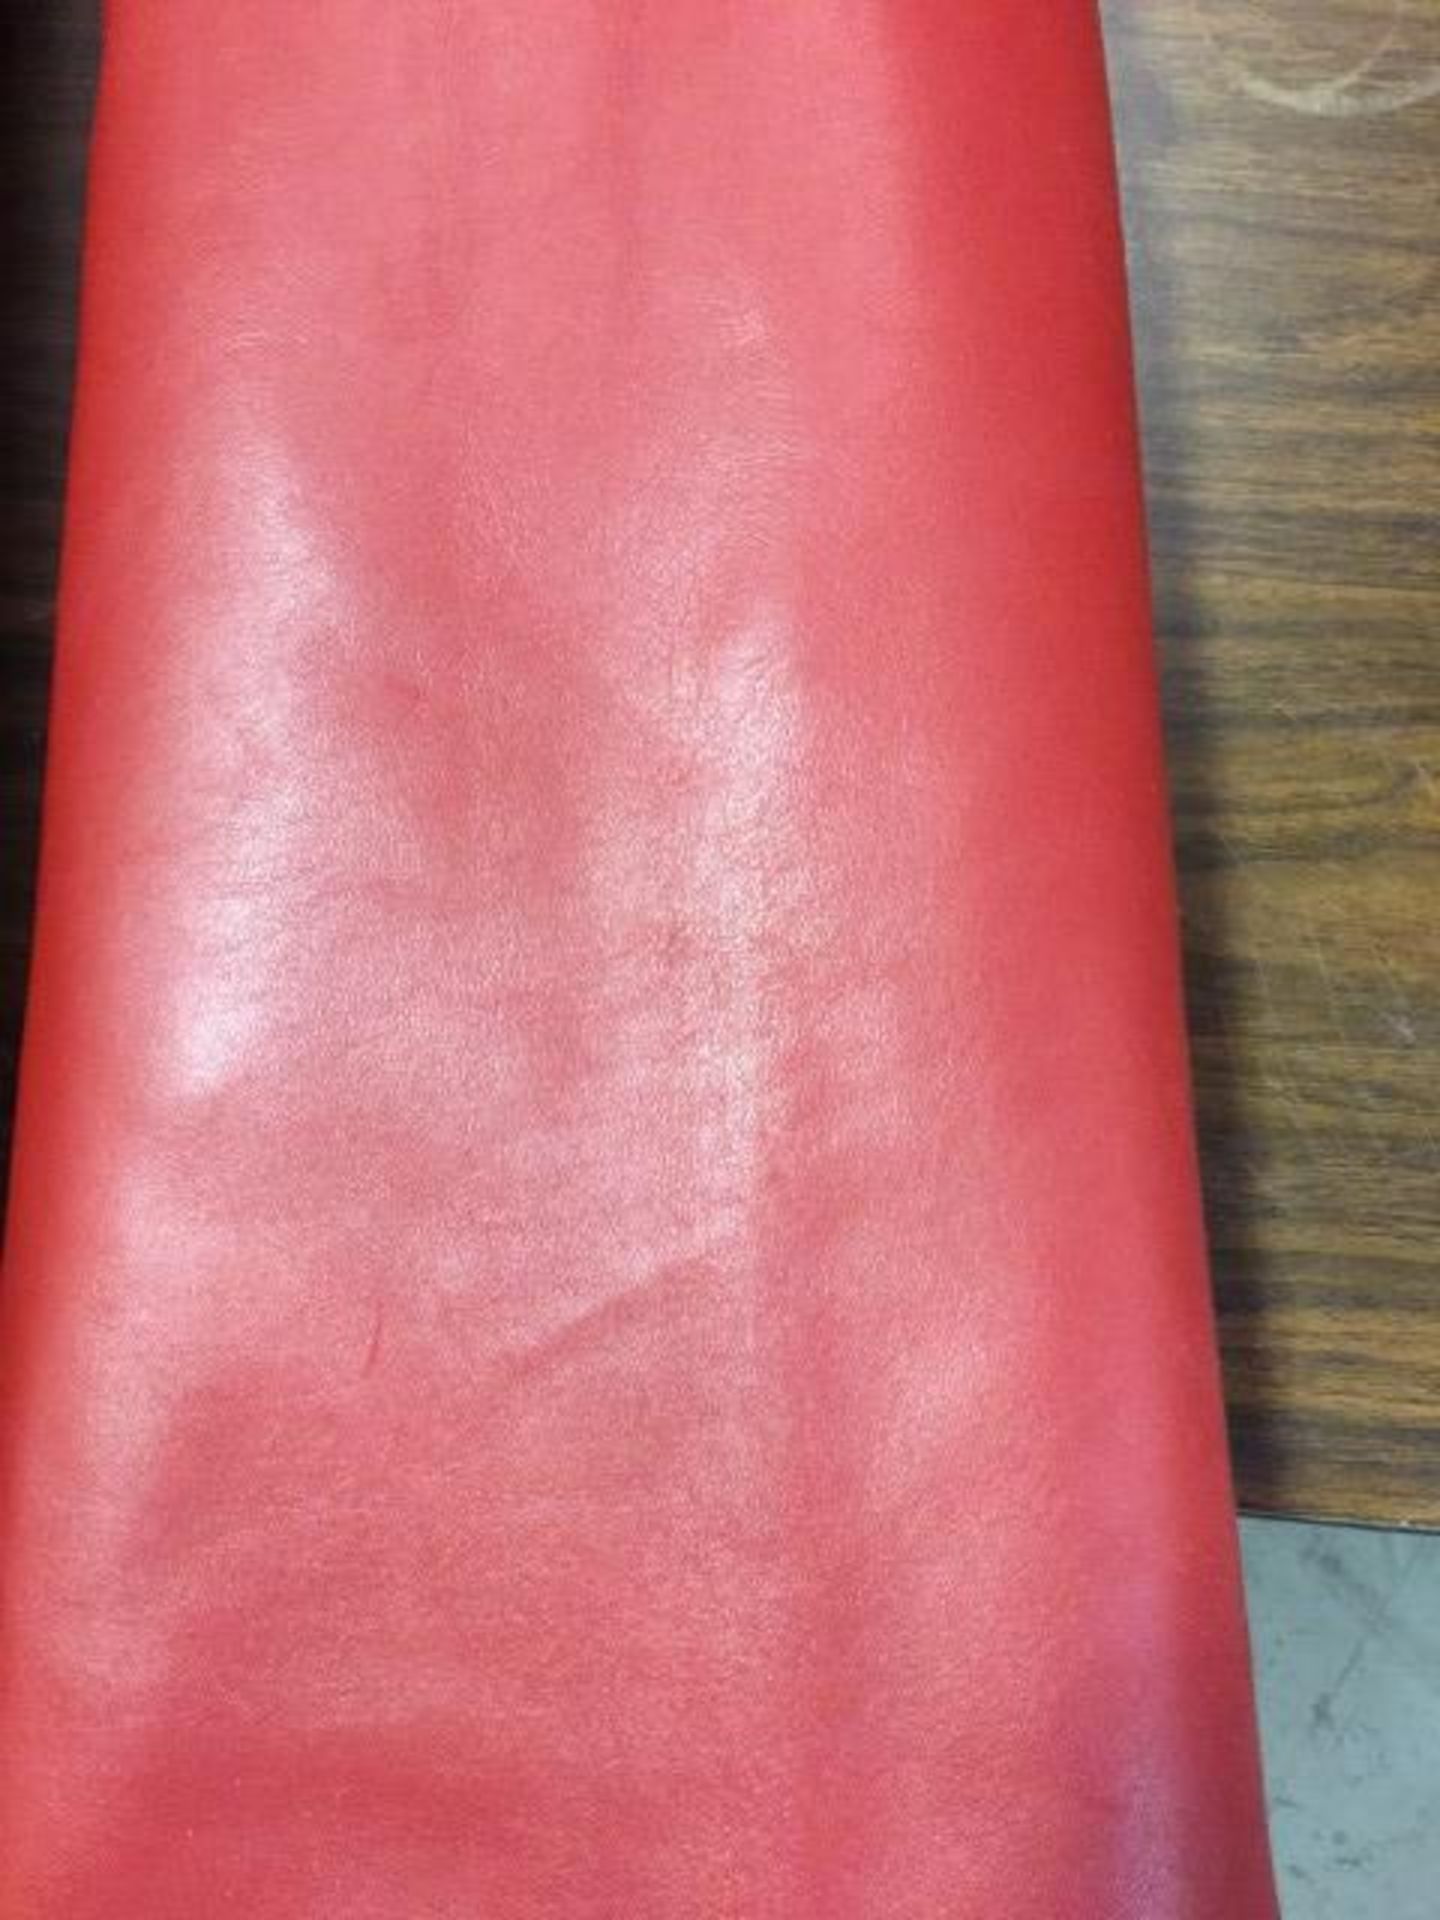 (77) Sq. Ft., 4 Oz. Dark Red Fine Hair Cell. 50% Penetration Leather Sides